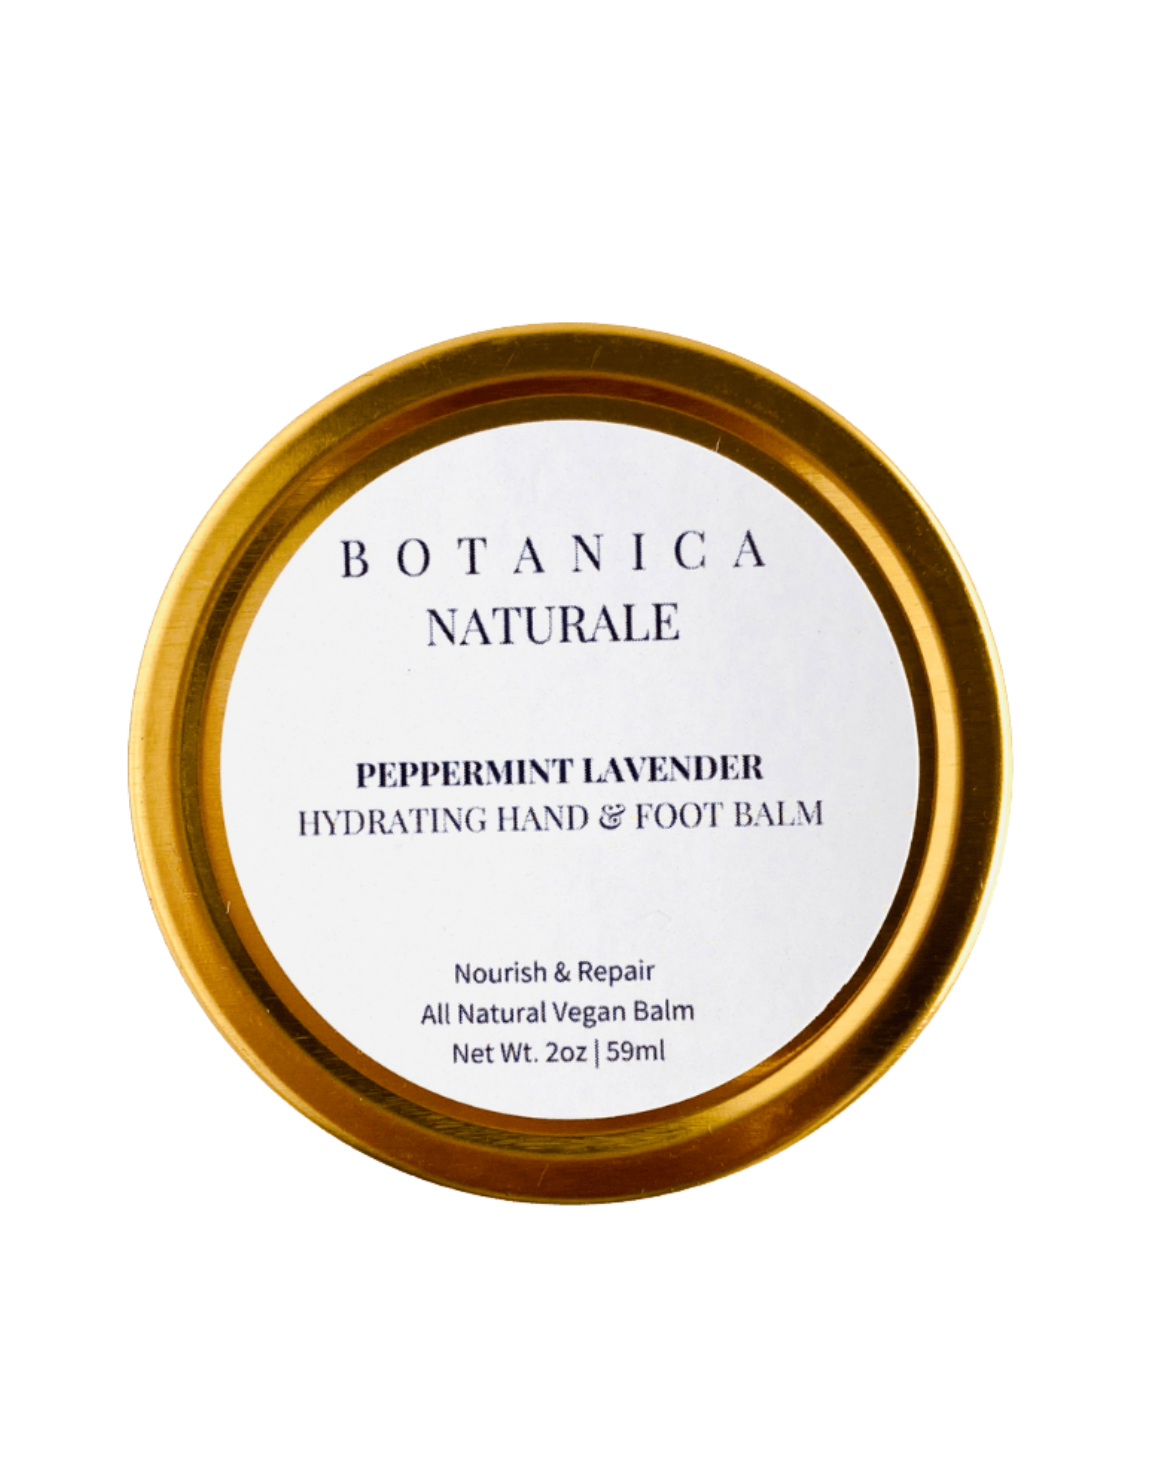 Peppermint Lavender Hand and Foot Balm